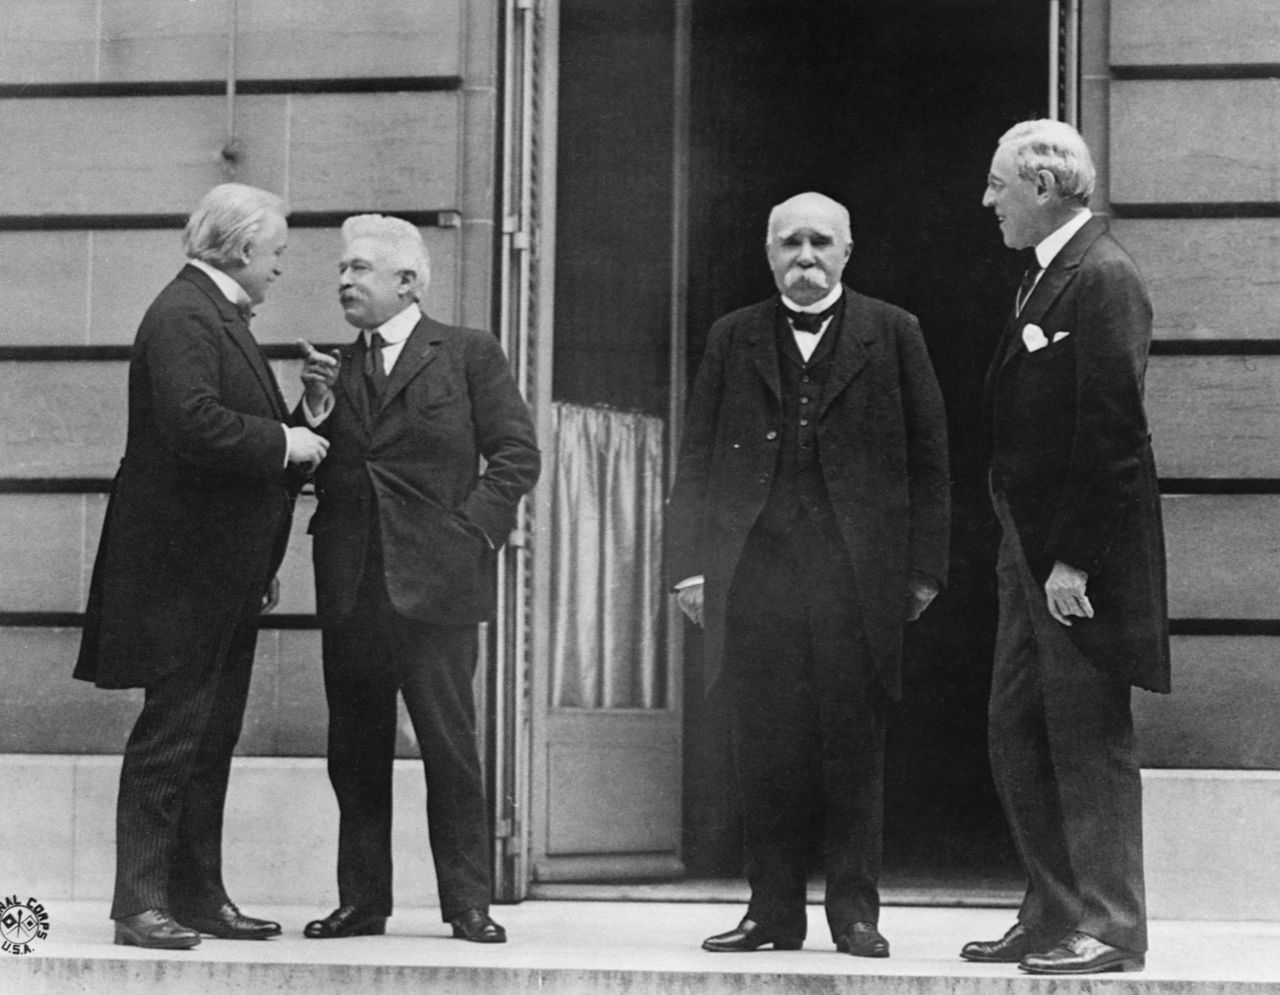 Prime Minister Lloyd George of Great Britain, Prime Minister Orlando of Italy, Premier Clemenceau of France, and President Wilson of the United States meet at the Hotel Crillon in Paris as part of the peace conference